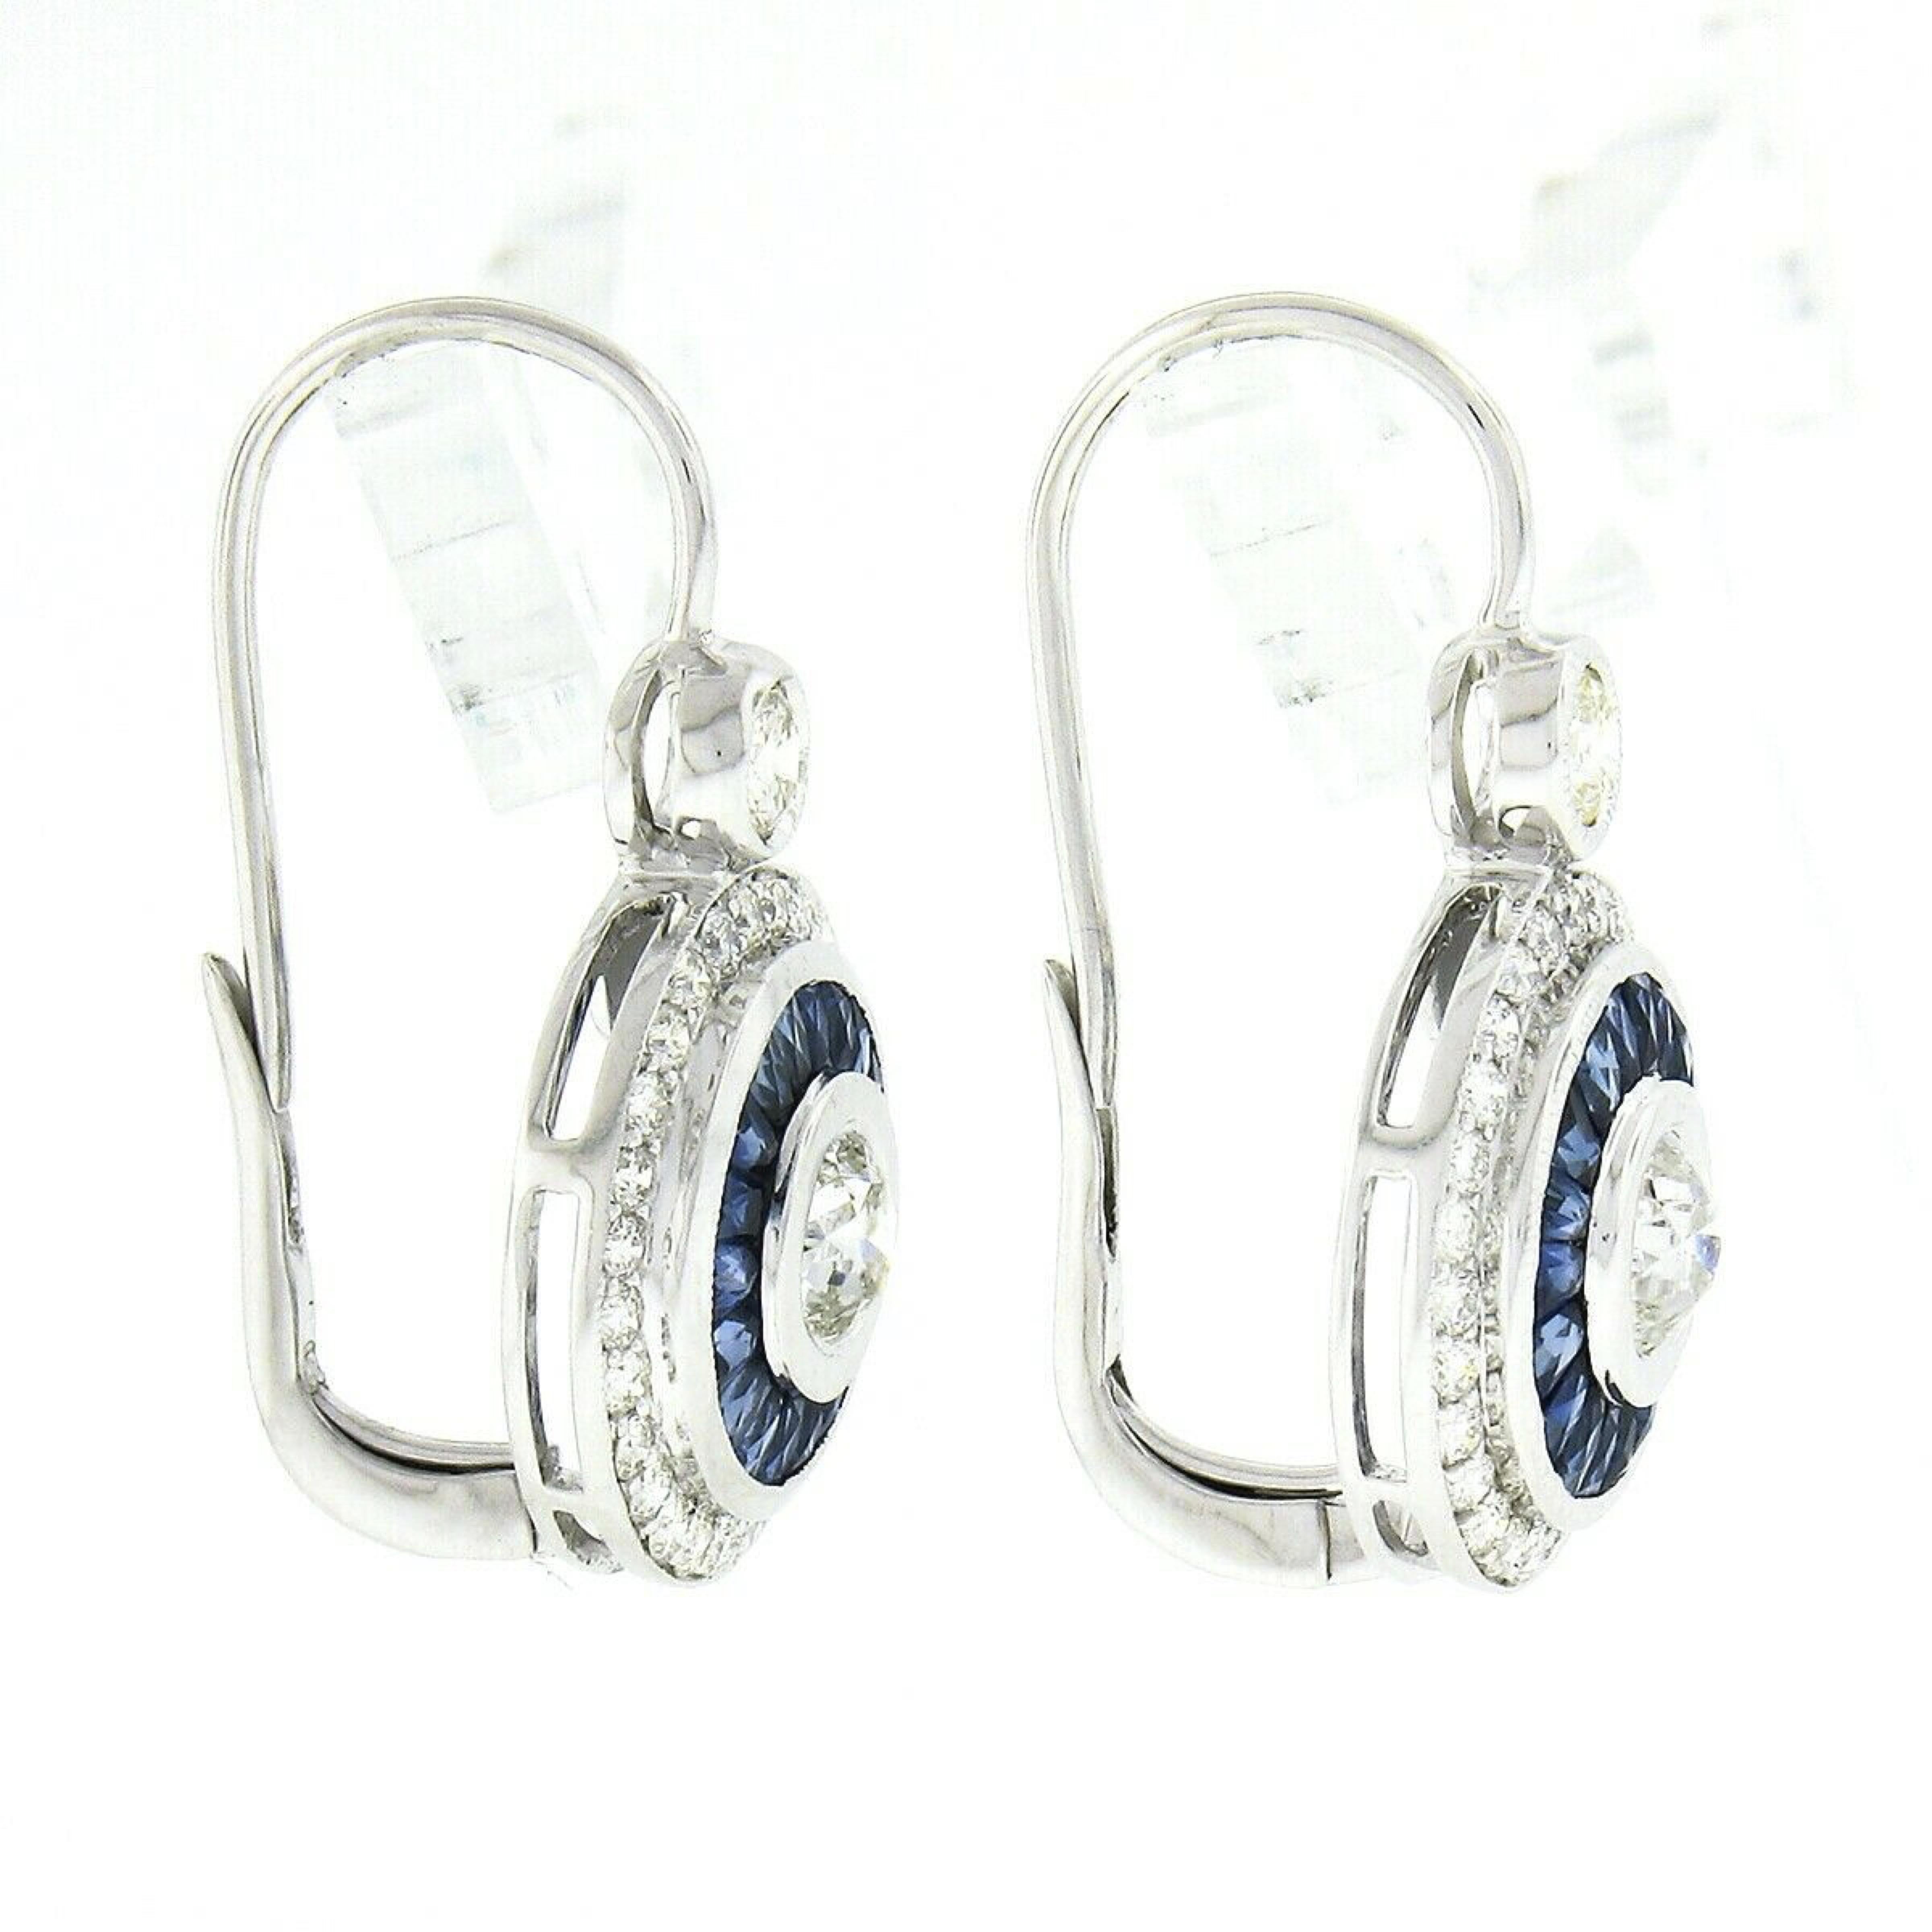 New 14k White Gold European Bezel Diamond W/ Calibre Sapphire Halo Drop Earrings In New Condition For Sale In Montclair, NJ